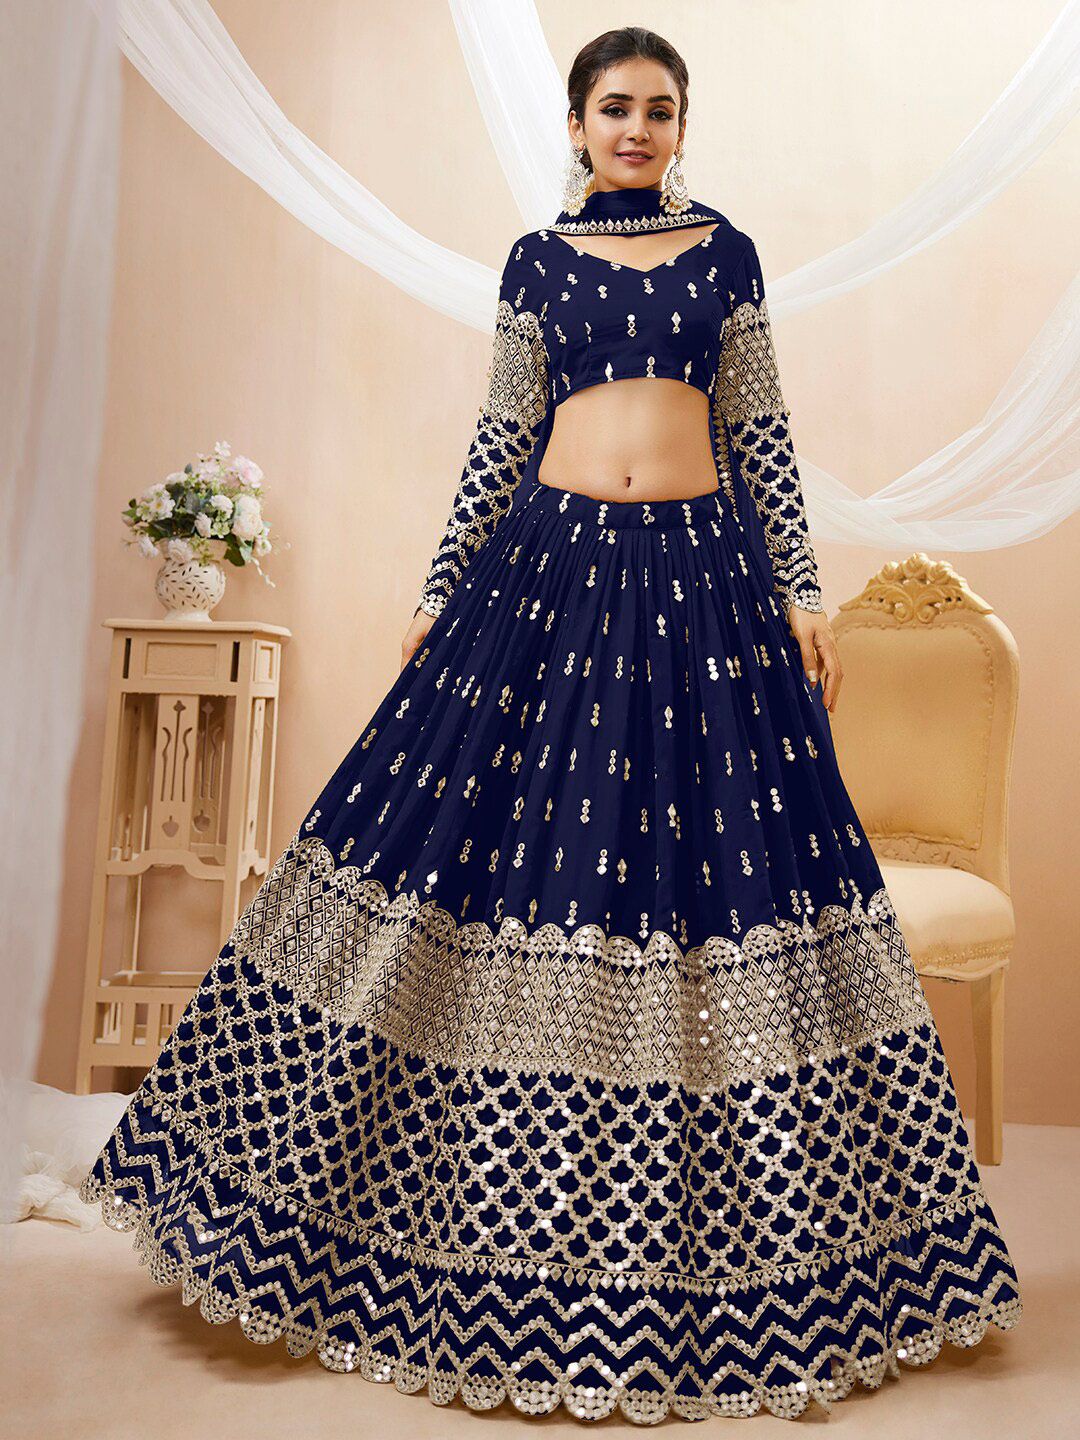 FABPIXEL Embroidered Mirror Work Semi-Stitched Lehenga Choli With Dupatta Price in India